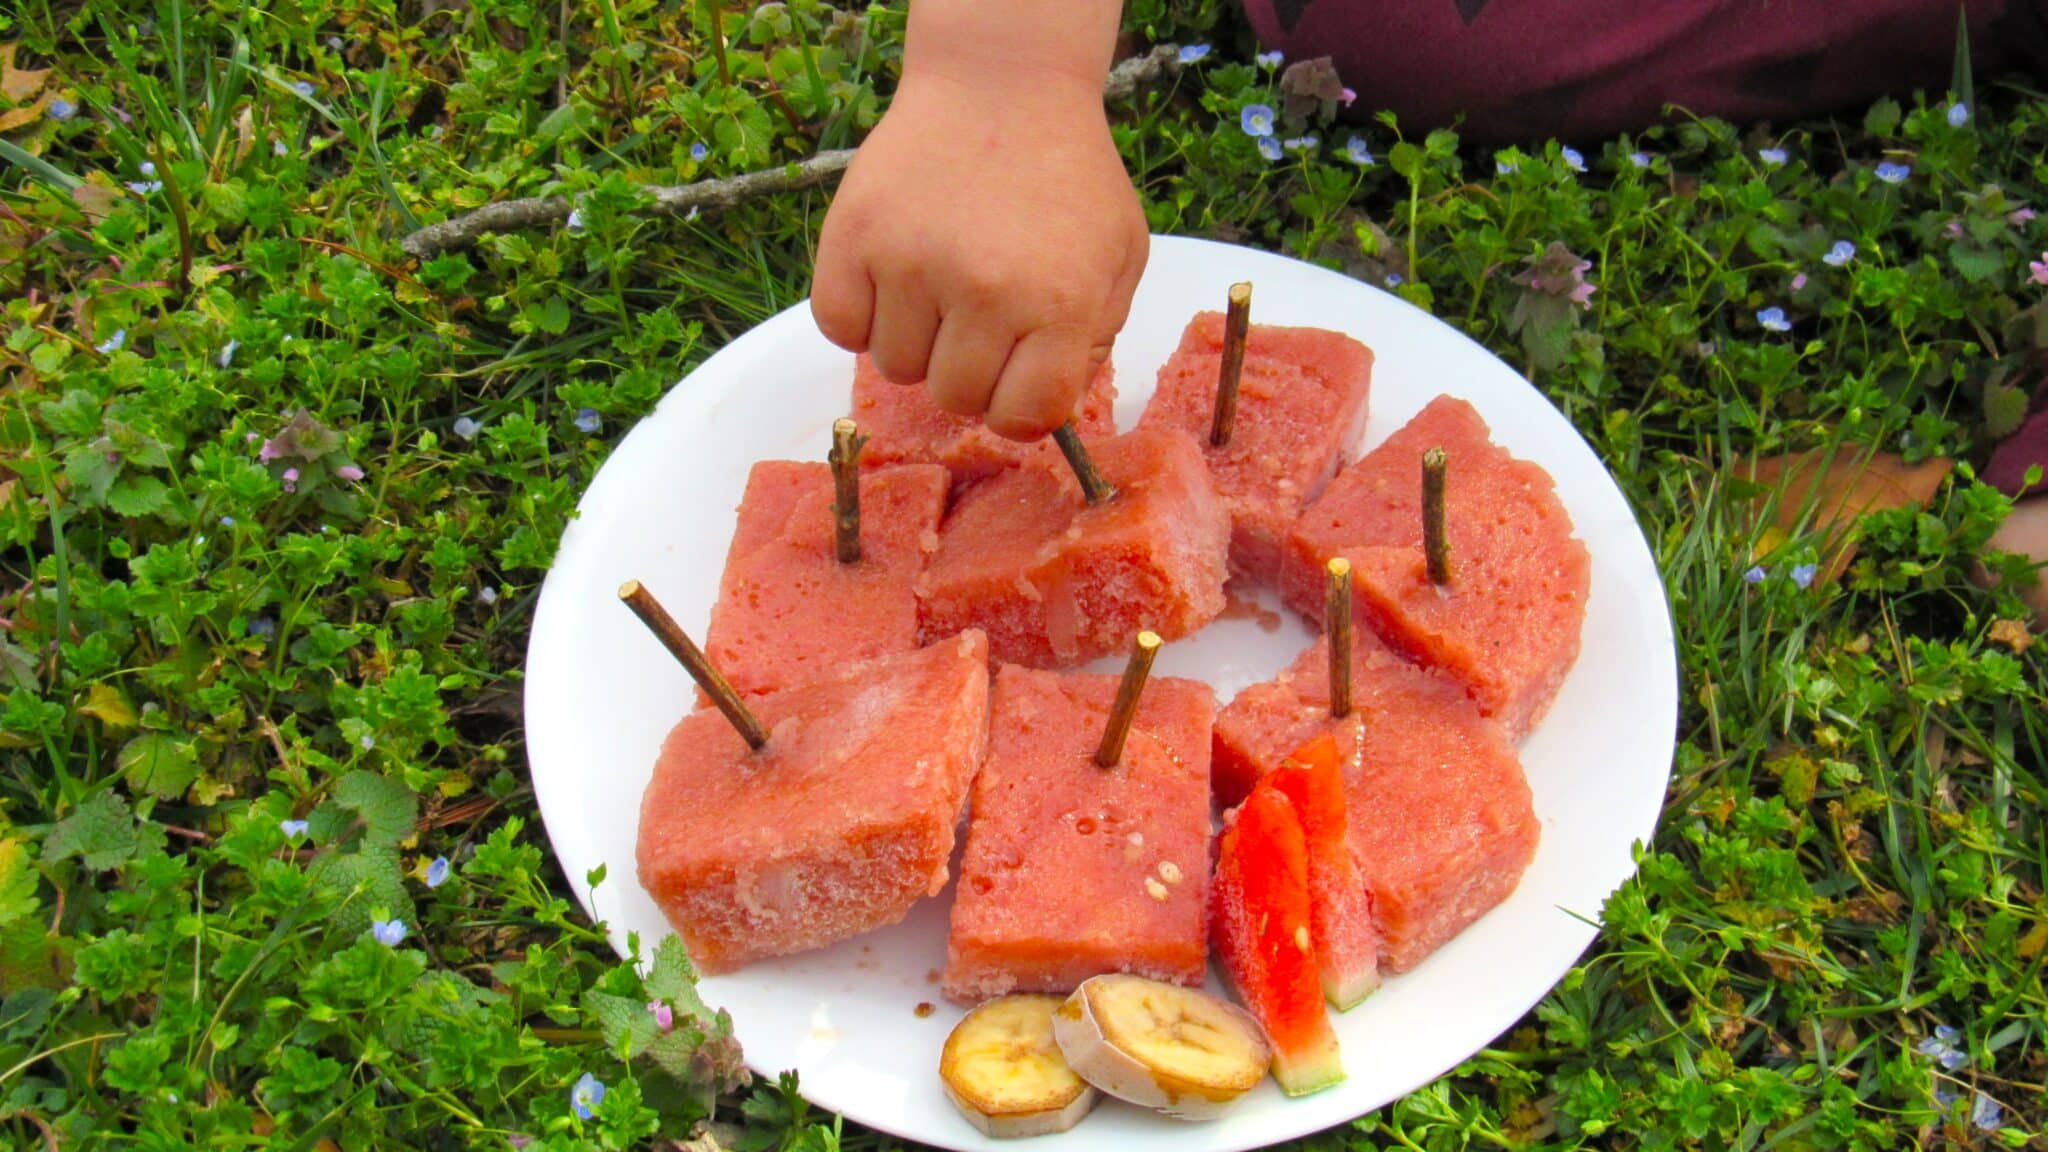 Watermelon popsicles are served on a white plate, and a hand picks one popsicle.